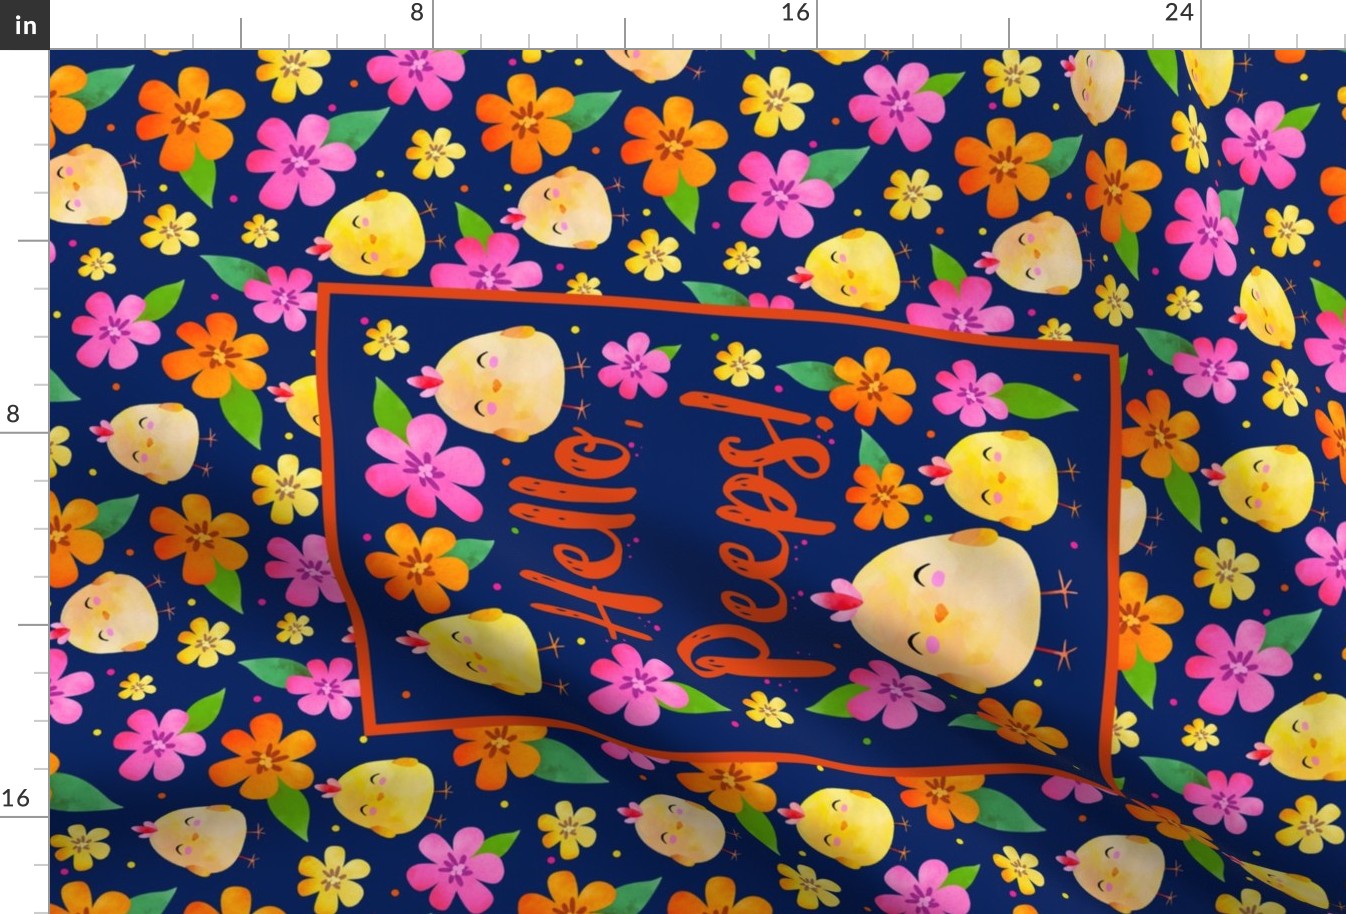 Large 27x18 Fat Quarter Panel Hello, Peeps! Yellow Baby Farm Chicks and Flowers for Wall Hanging Art or Tea Towel on Dark Blue Background